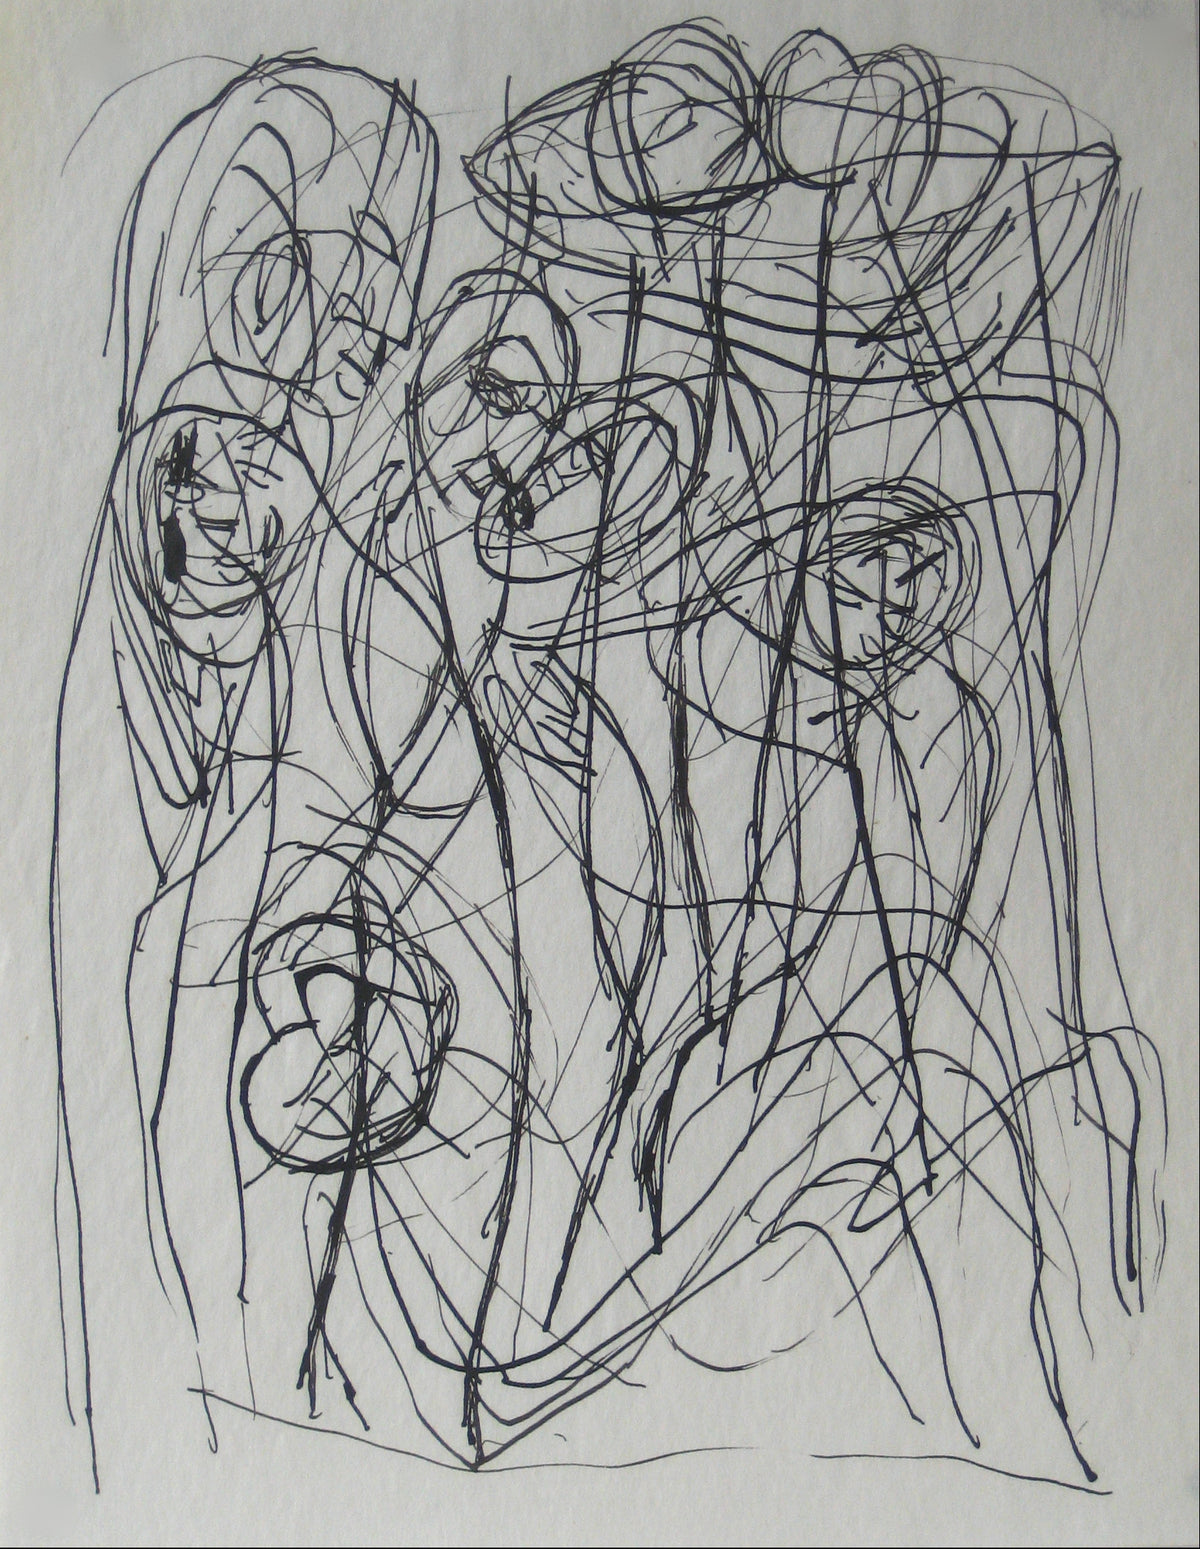 Abstract Expressionist Figures &lt;br&gt;Early-Mid 20th Century Ink&lt;br&gt;&lt;br&gt;#13605